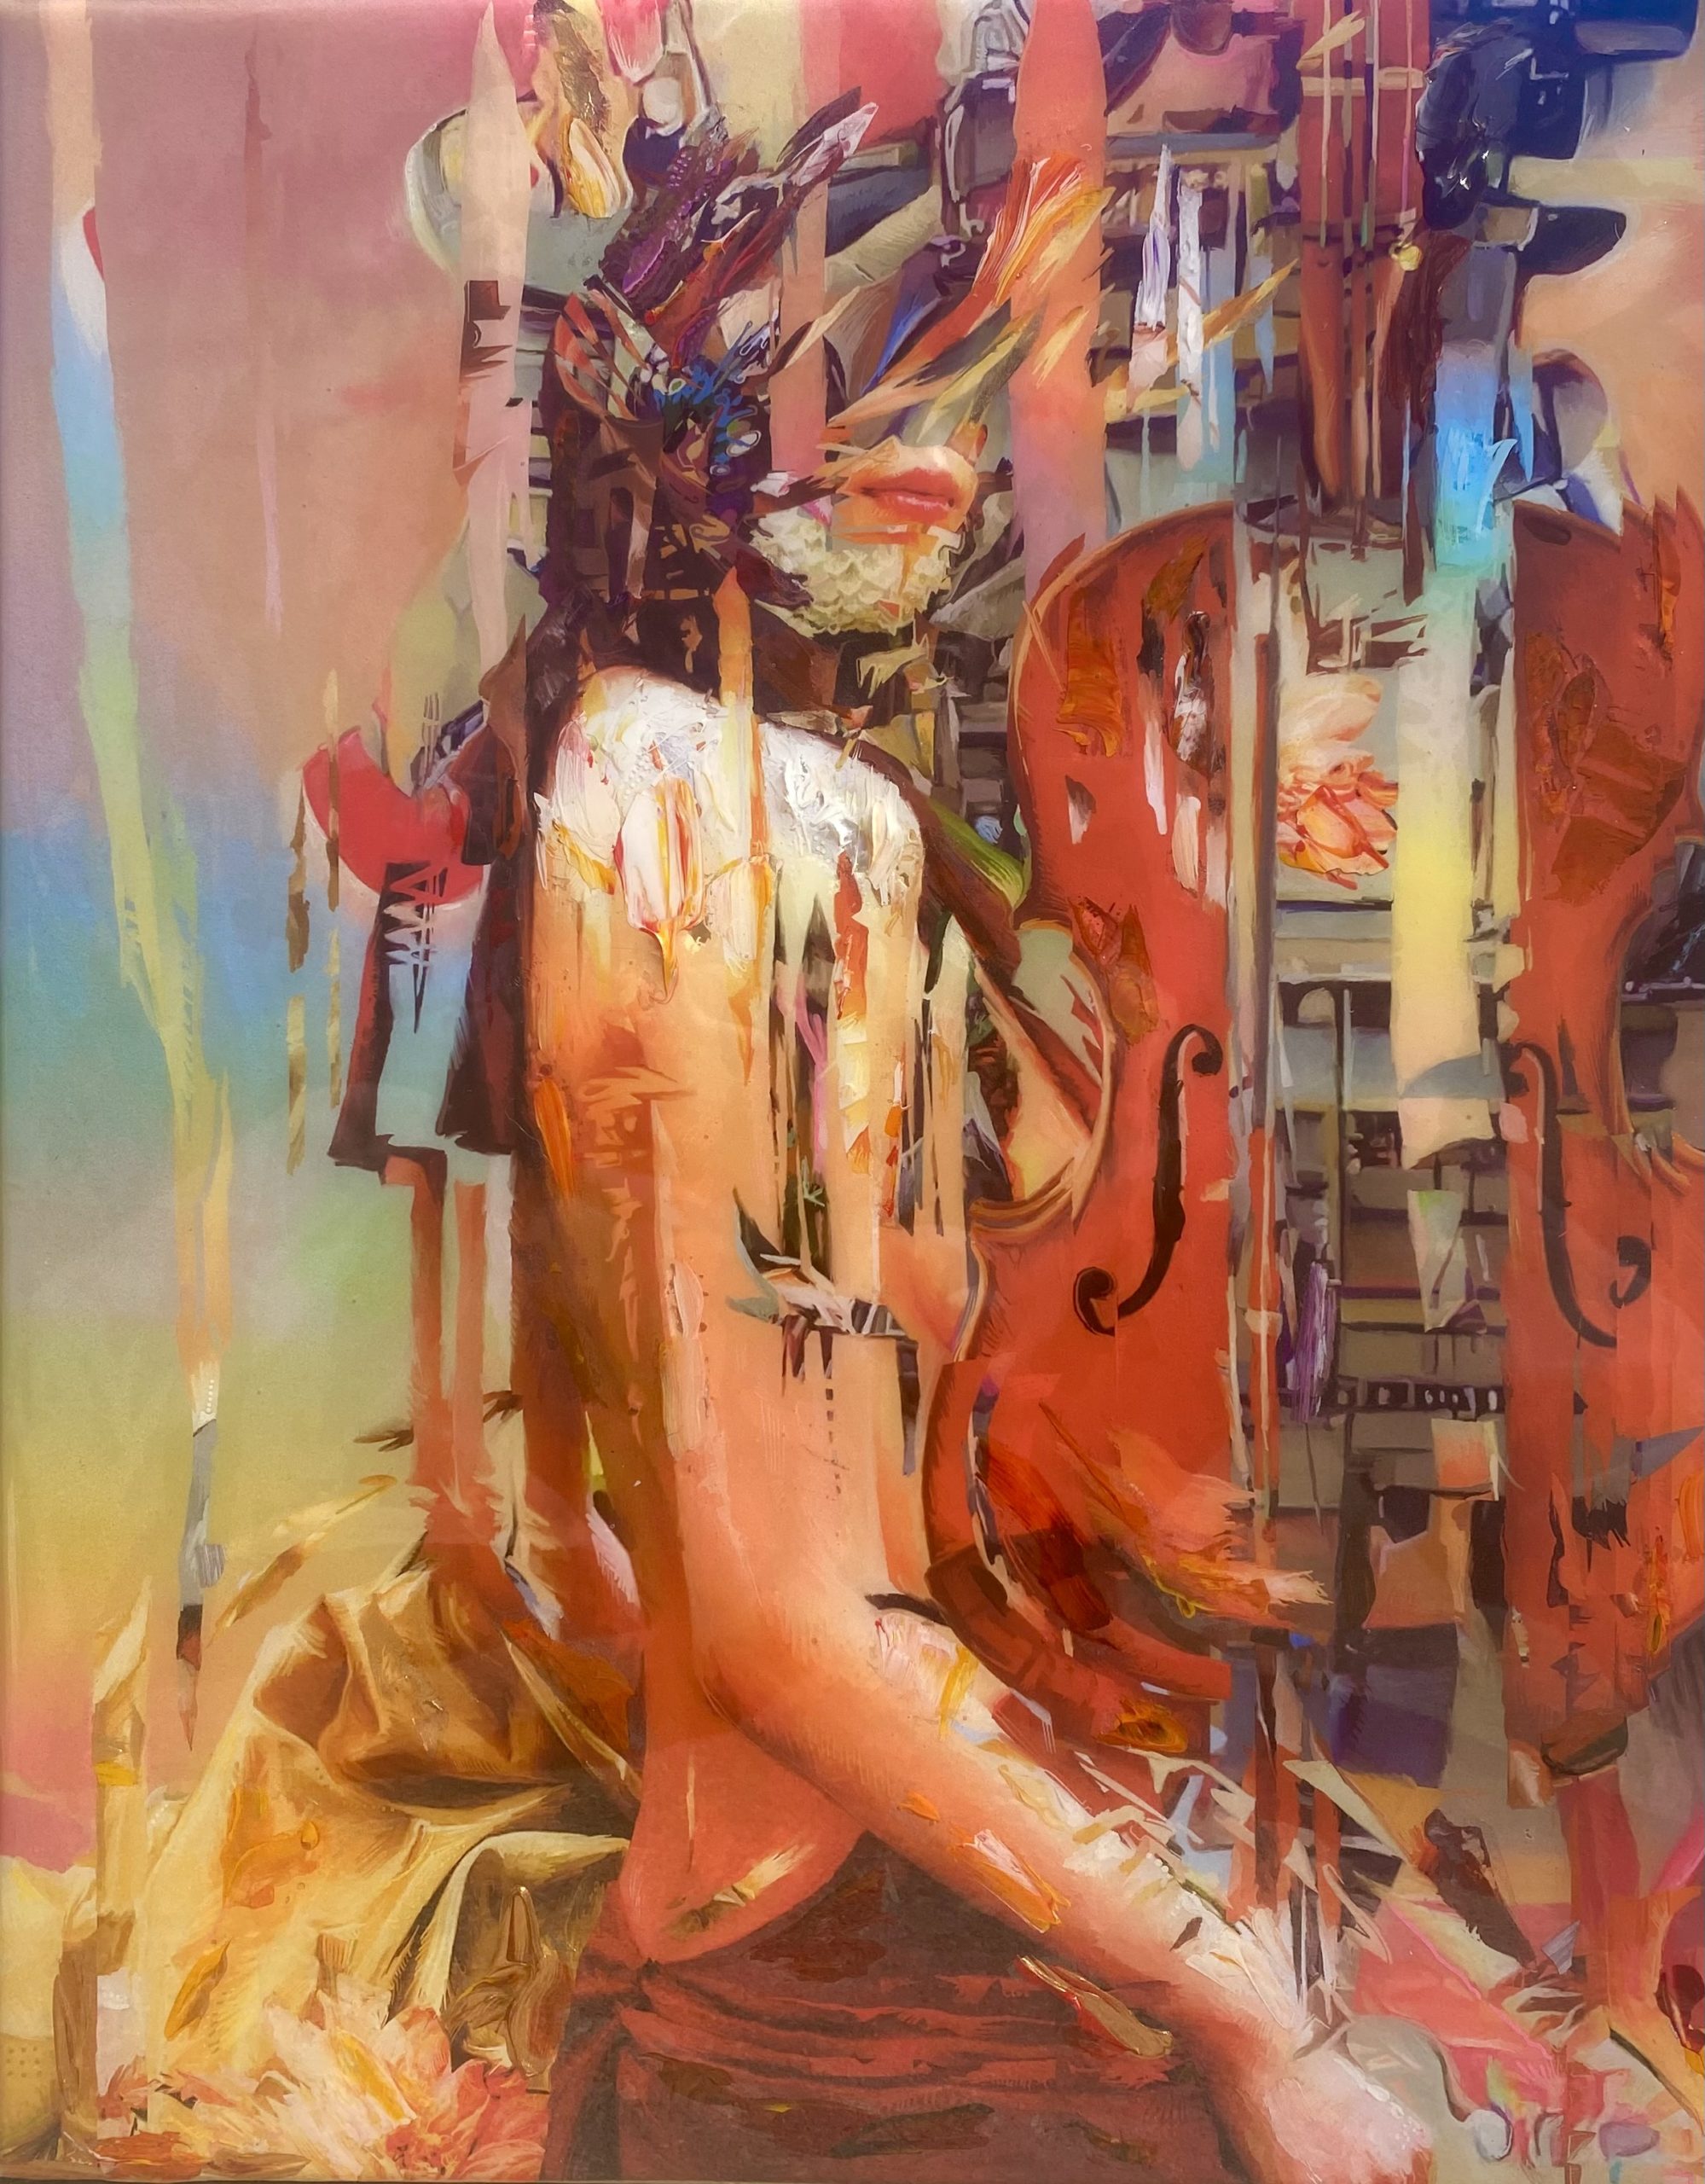 ScoJo , Violin Femme 2, 2022. Acrylic, spray paint, pencil, paint pen and duralar on archival pigment print on paper, 16" X 20", $1740 framed.